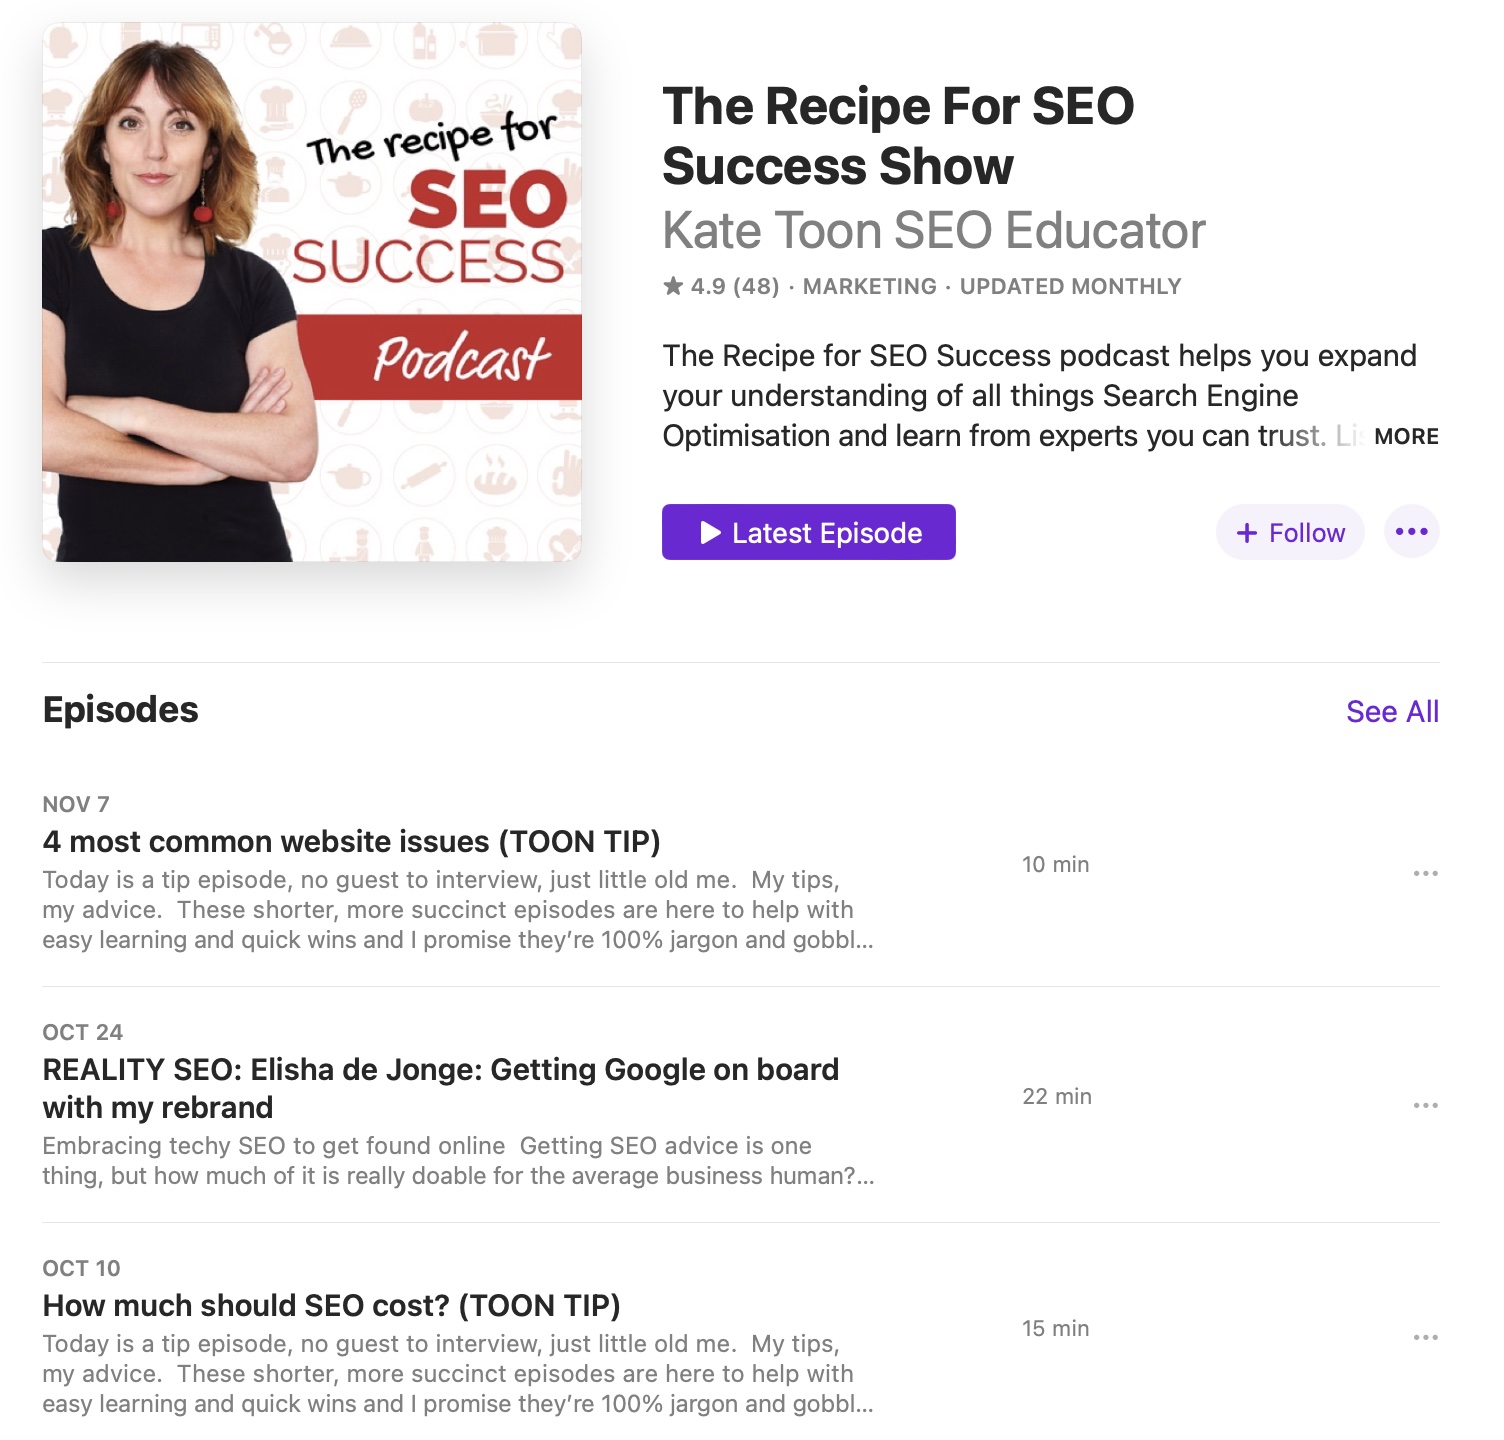 The Recipe for SEO Success Show page